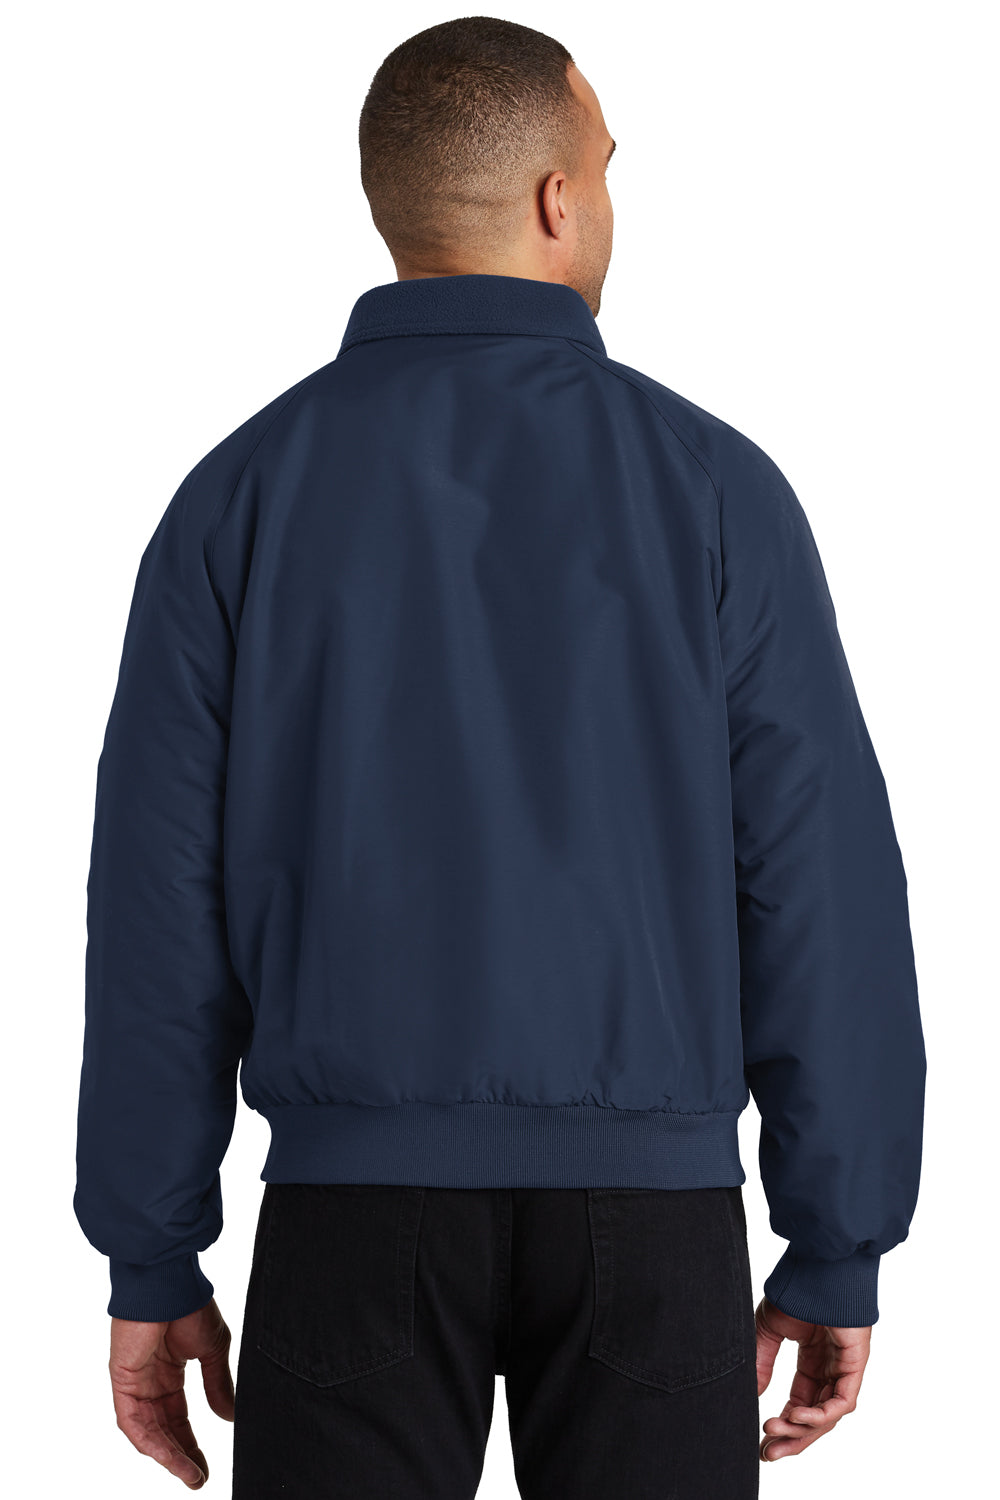 Port Authority J328 Mens Charger Wind & Water Resistant Full Zip Jacket Navy Blue Back